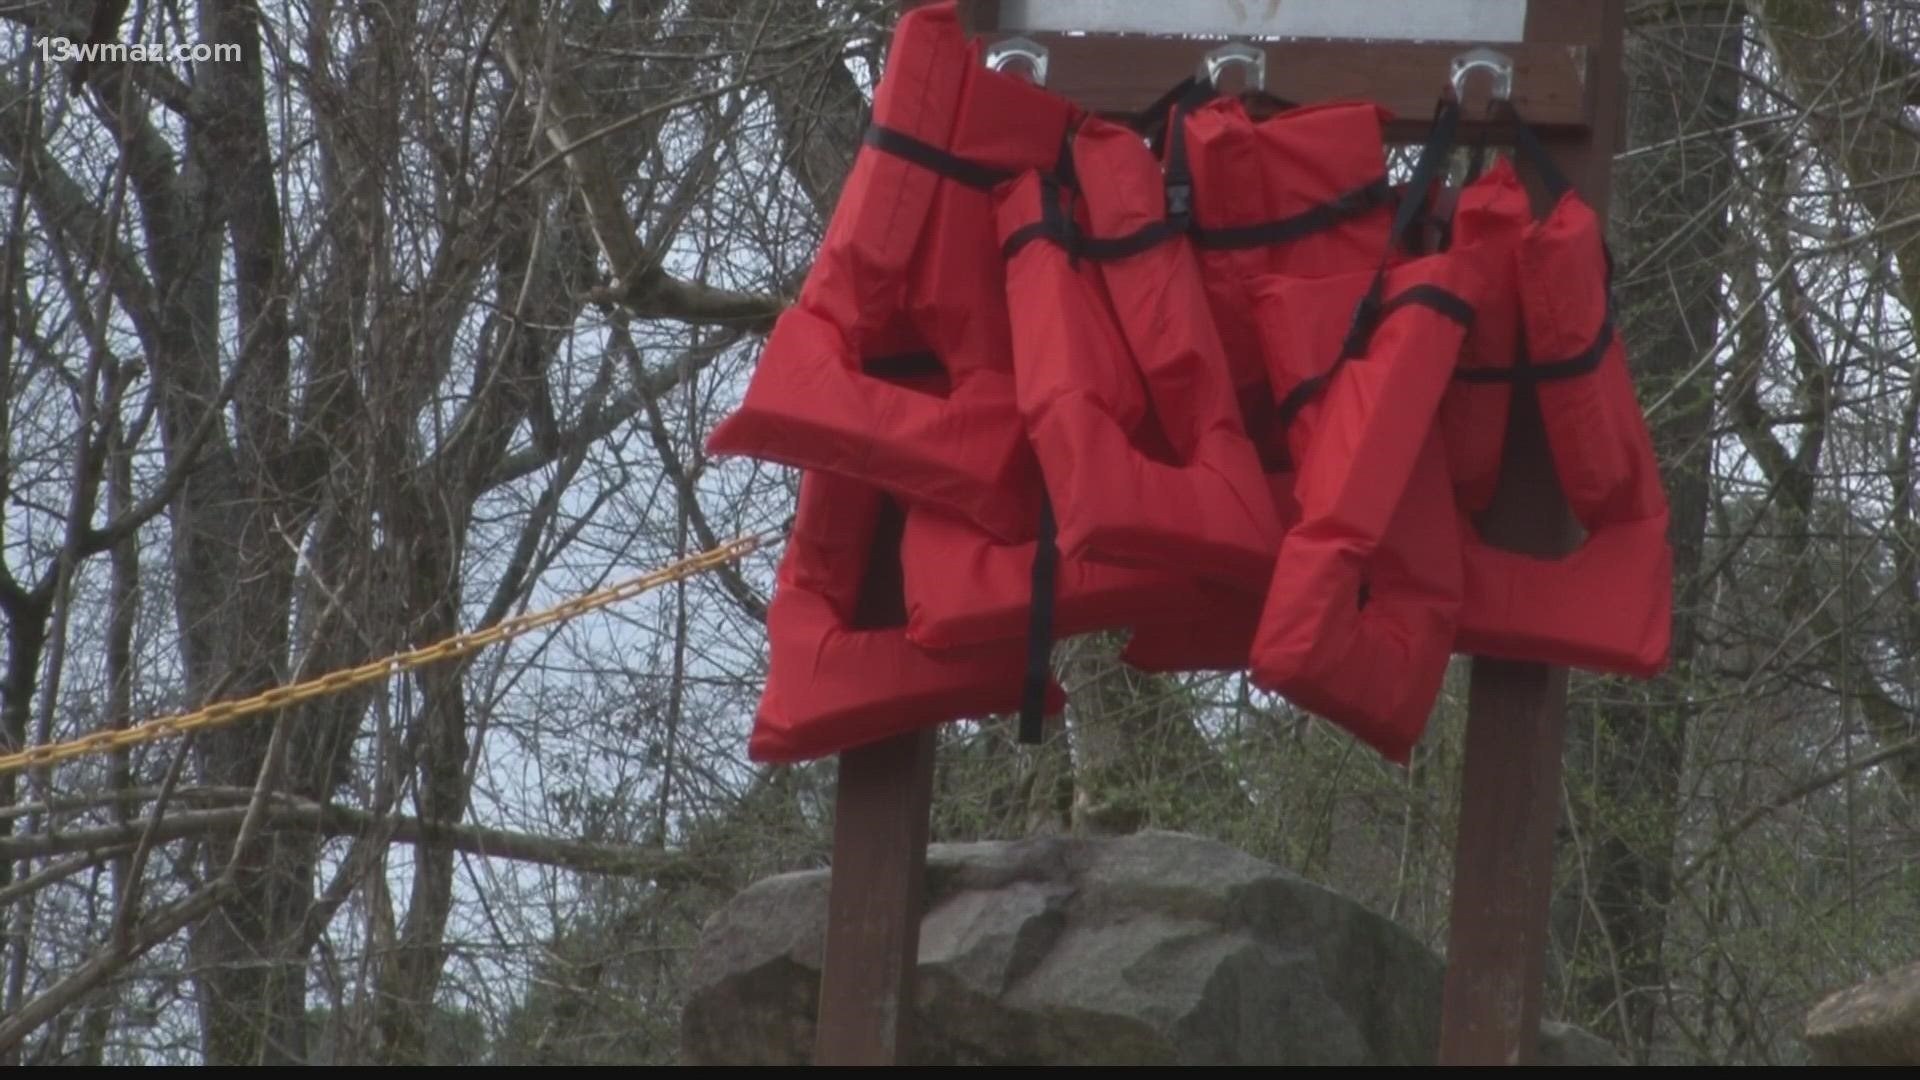 City leaders say they want folks to be as prepared as they can be on their rivers and lakes. They explain why the water isn't safe to swim in this time of year.